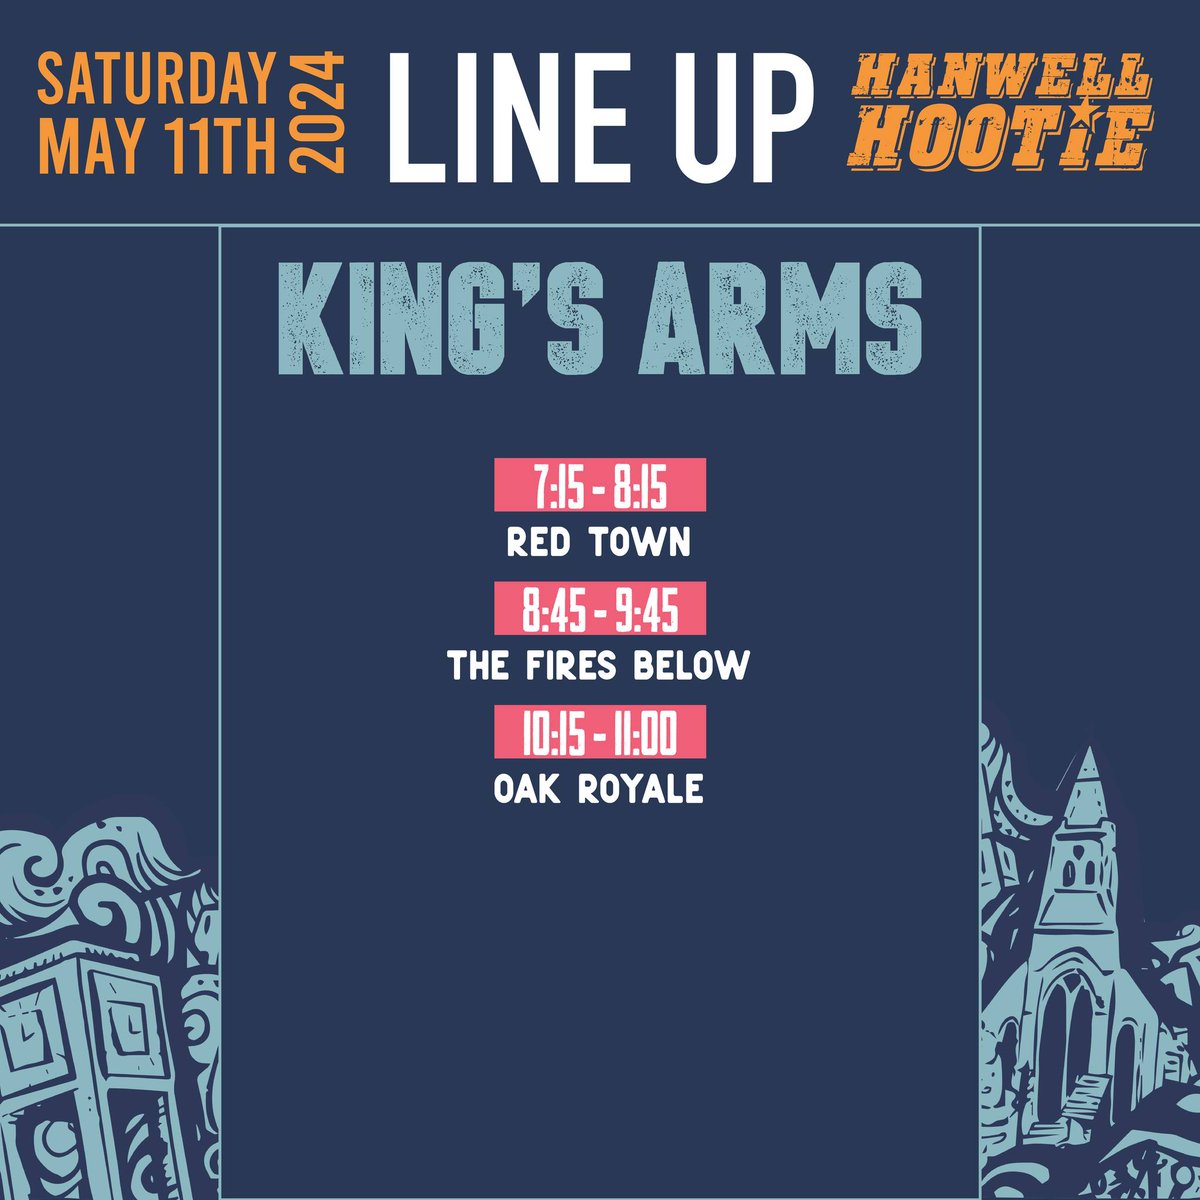 Next gig 11th May - FREE ENTRY We are playing at @HanwellHootie at The Kings Arms, W7 3SU on 8:45pm Check out our website for more details: thefiresbelow.com/live/ 🤘😃🤘#hanwellhootie #supportlivemusic #London #hanwell #londongigs #londonbands #thefiresbelow